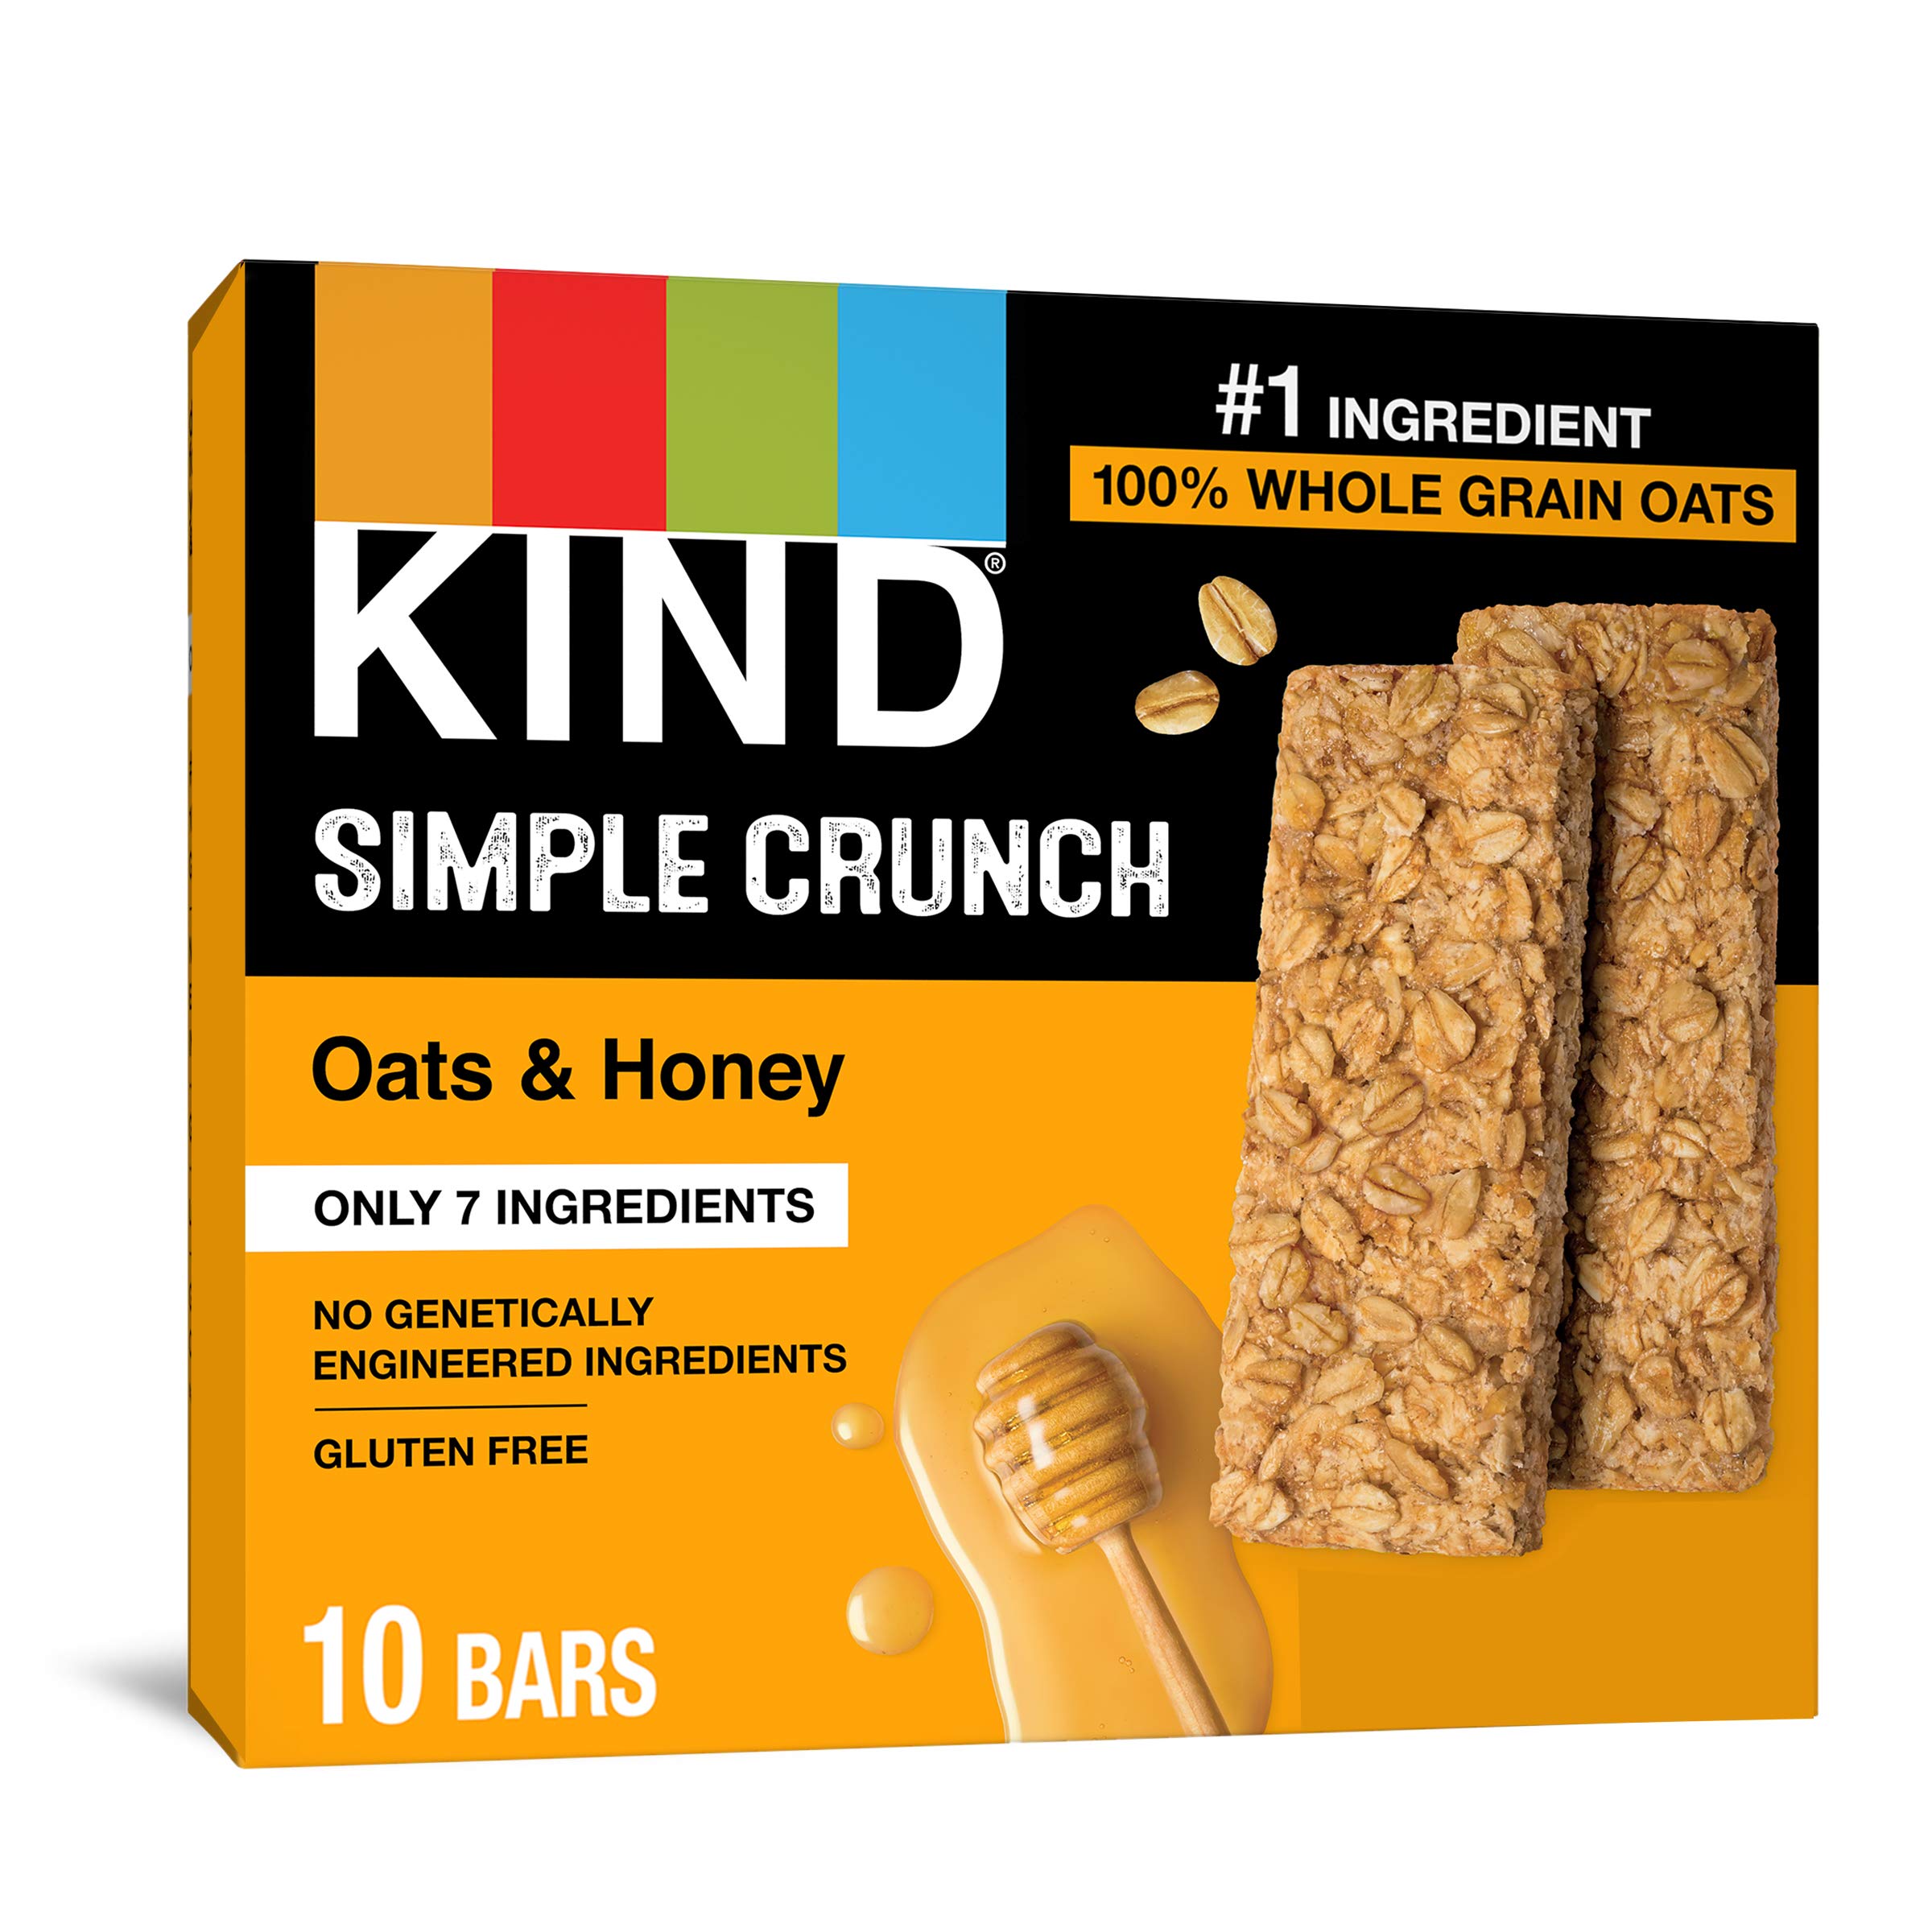 KIND Simple Crunch Bars, Oats & Honey, 7 Ounce (Pack of 8)